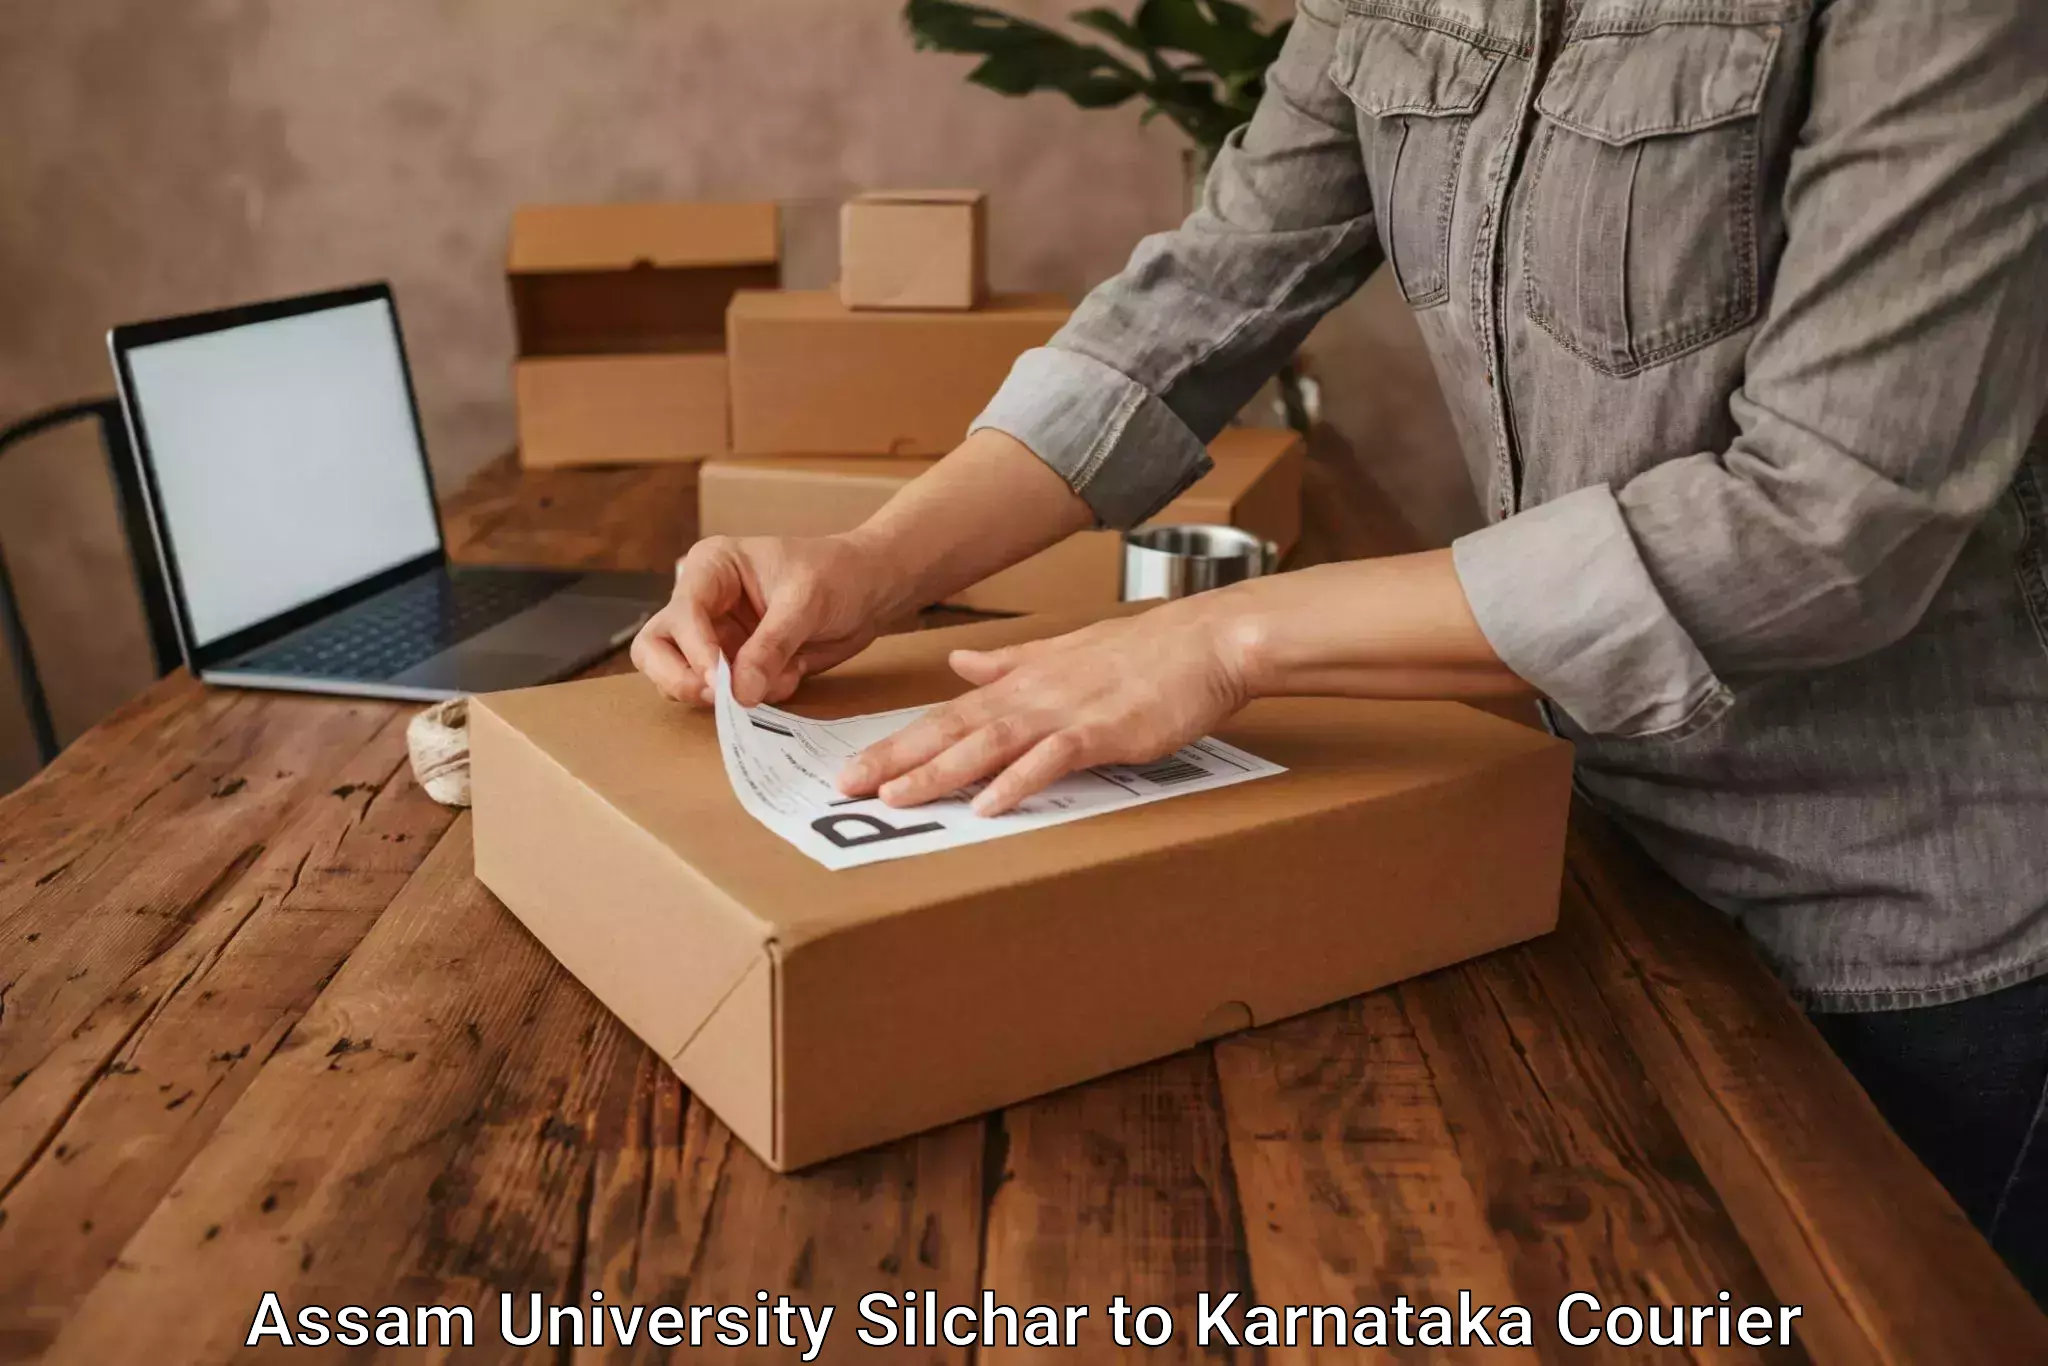 Easy access courier services in Assam University Silchar to Mudhol